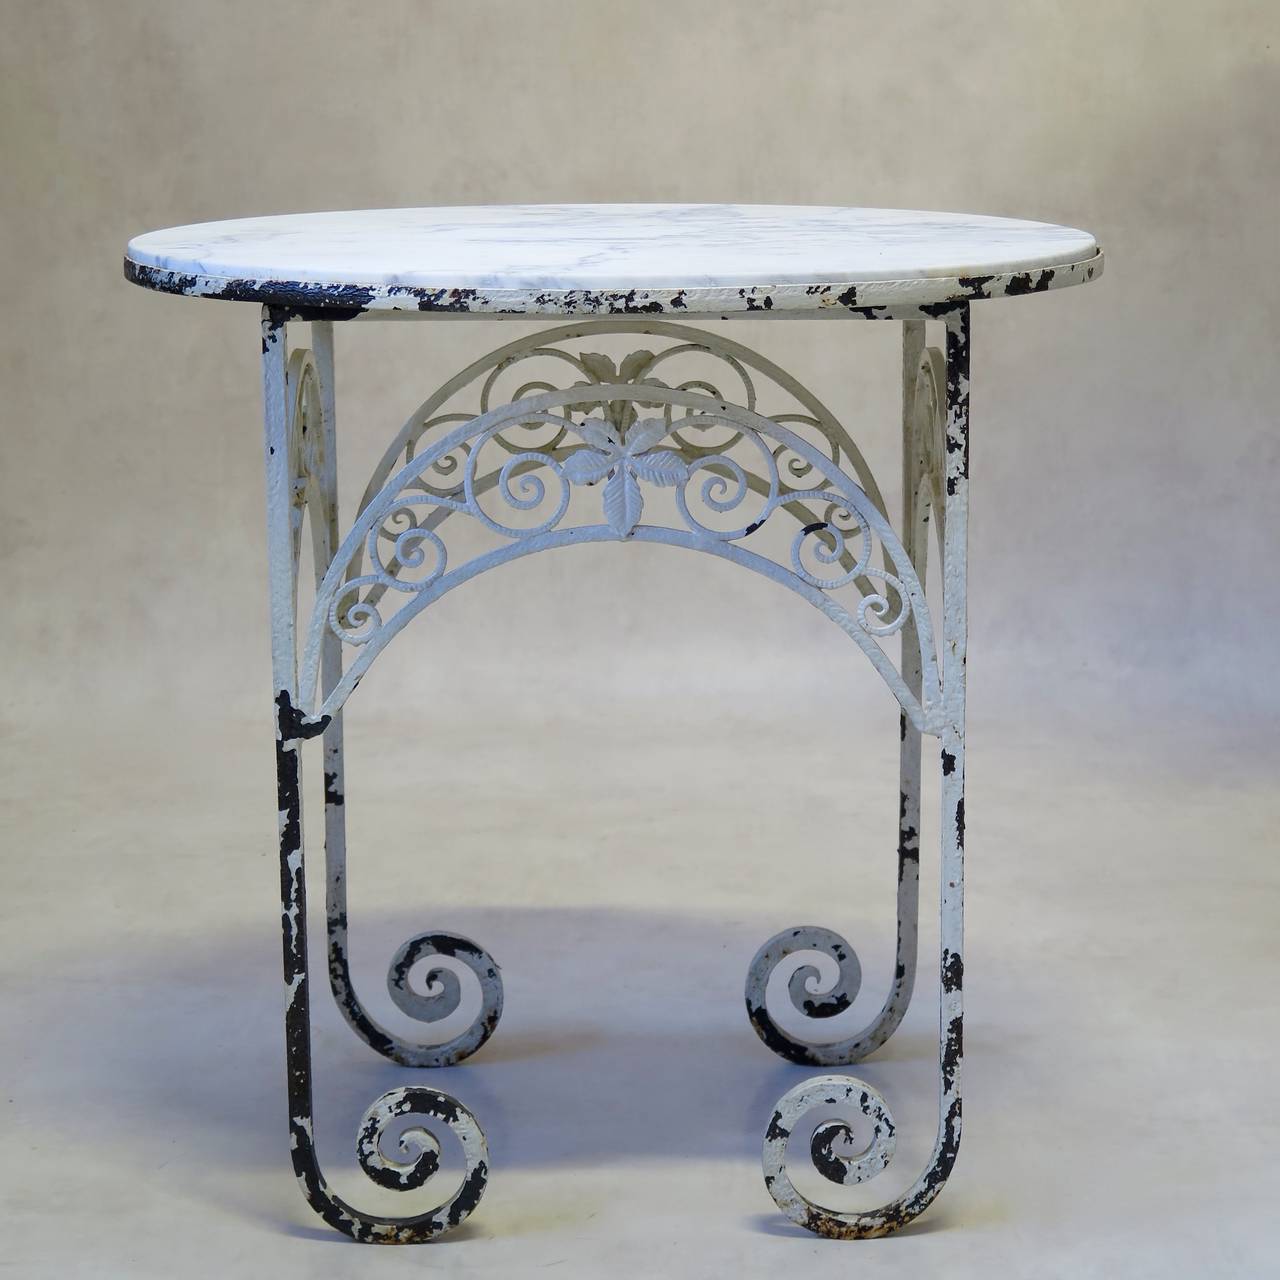 Delightful petite oval side table with a wrought iron base and a white marble top veined with grey. The base is unusual with its scrolled feet and pretty apron, decorated with leaves and a scrolling motif. Original, distressed, glossy white paint.